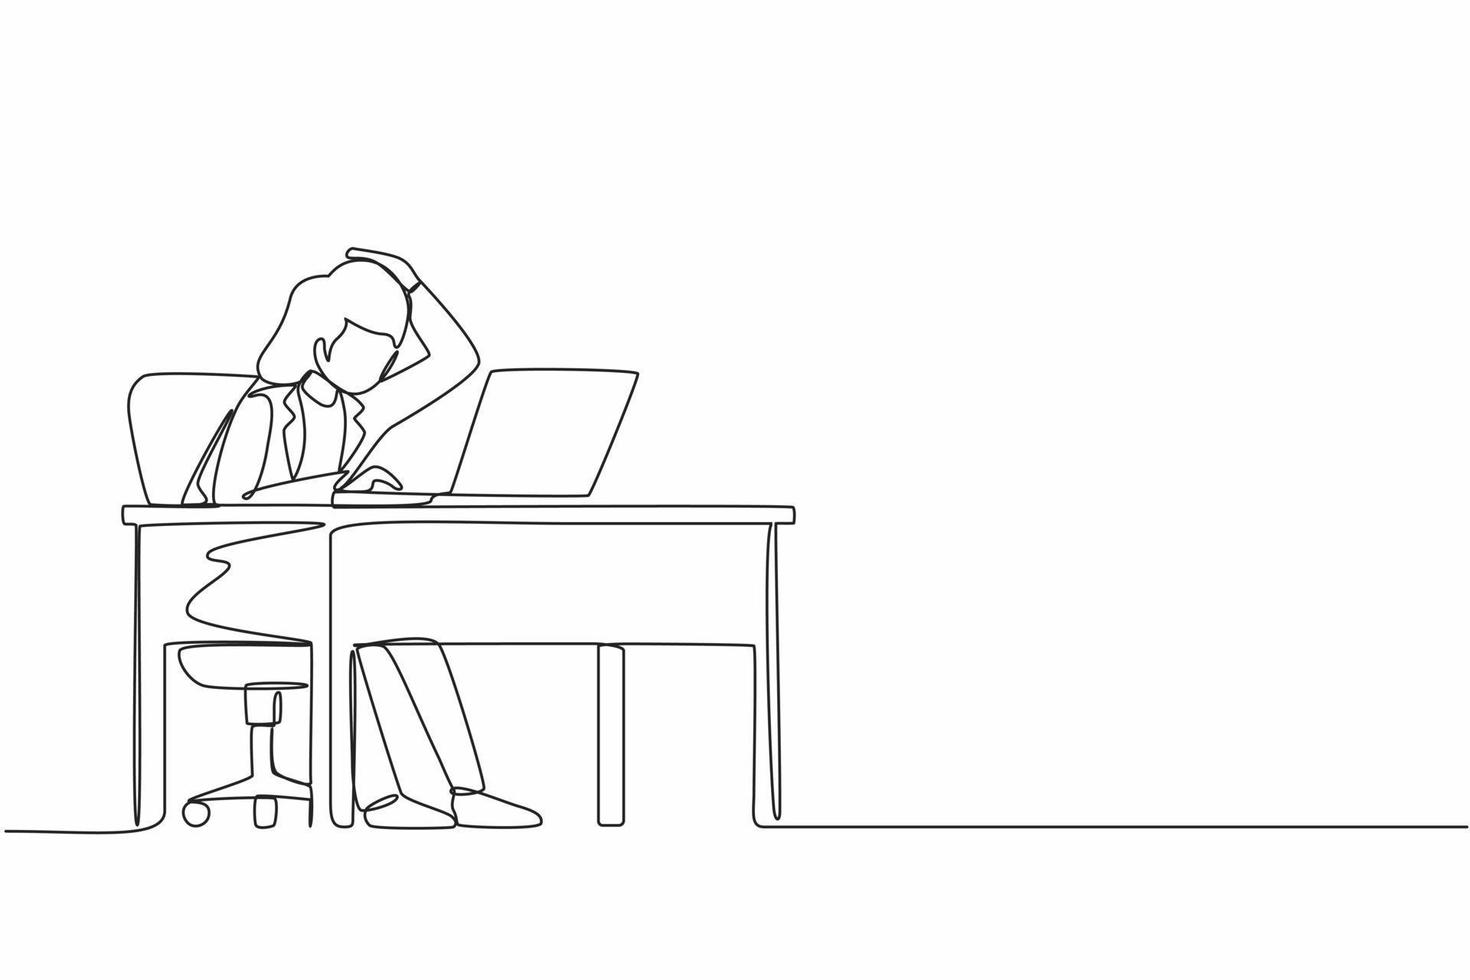 Single continuous line drawing female manager working on computer laptop. Woman with question mark over head scratches back of her head sitting in front of laptop. One line draw graphic design vector